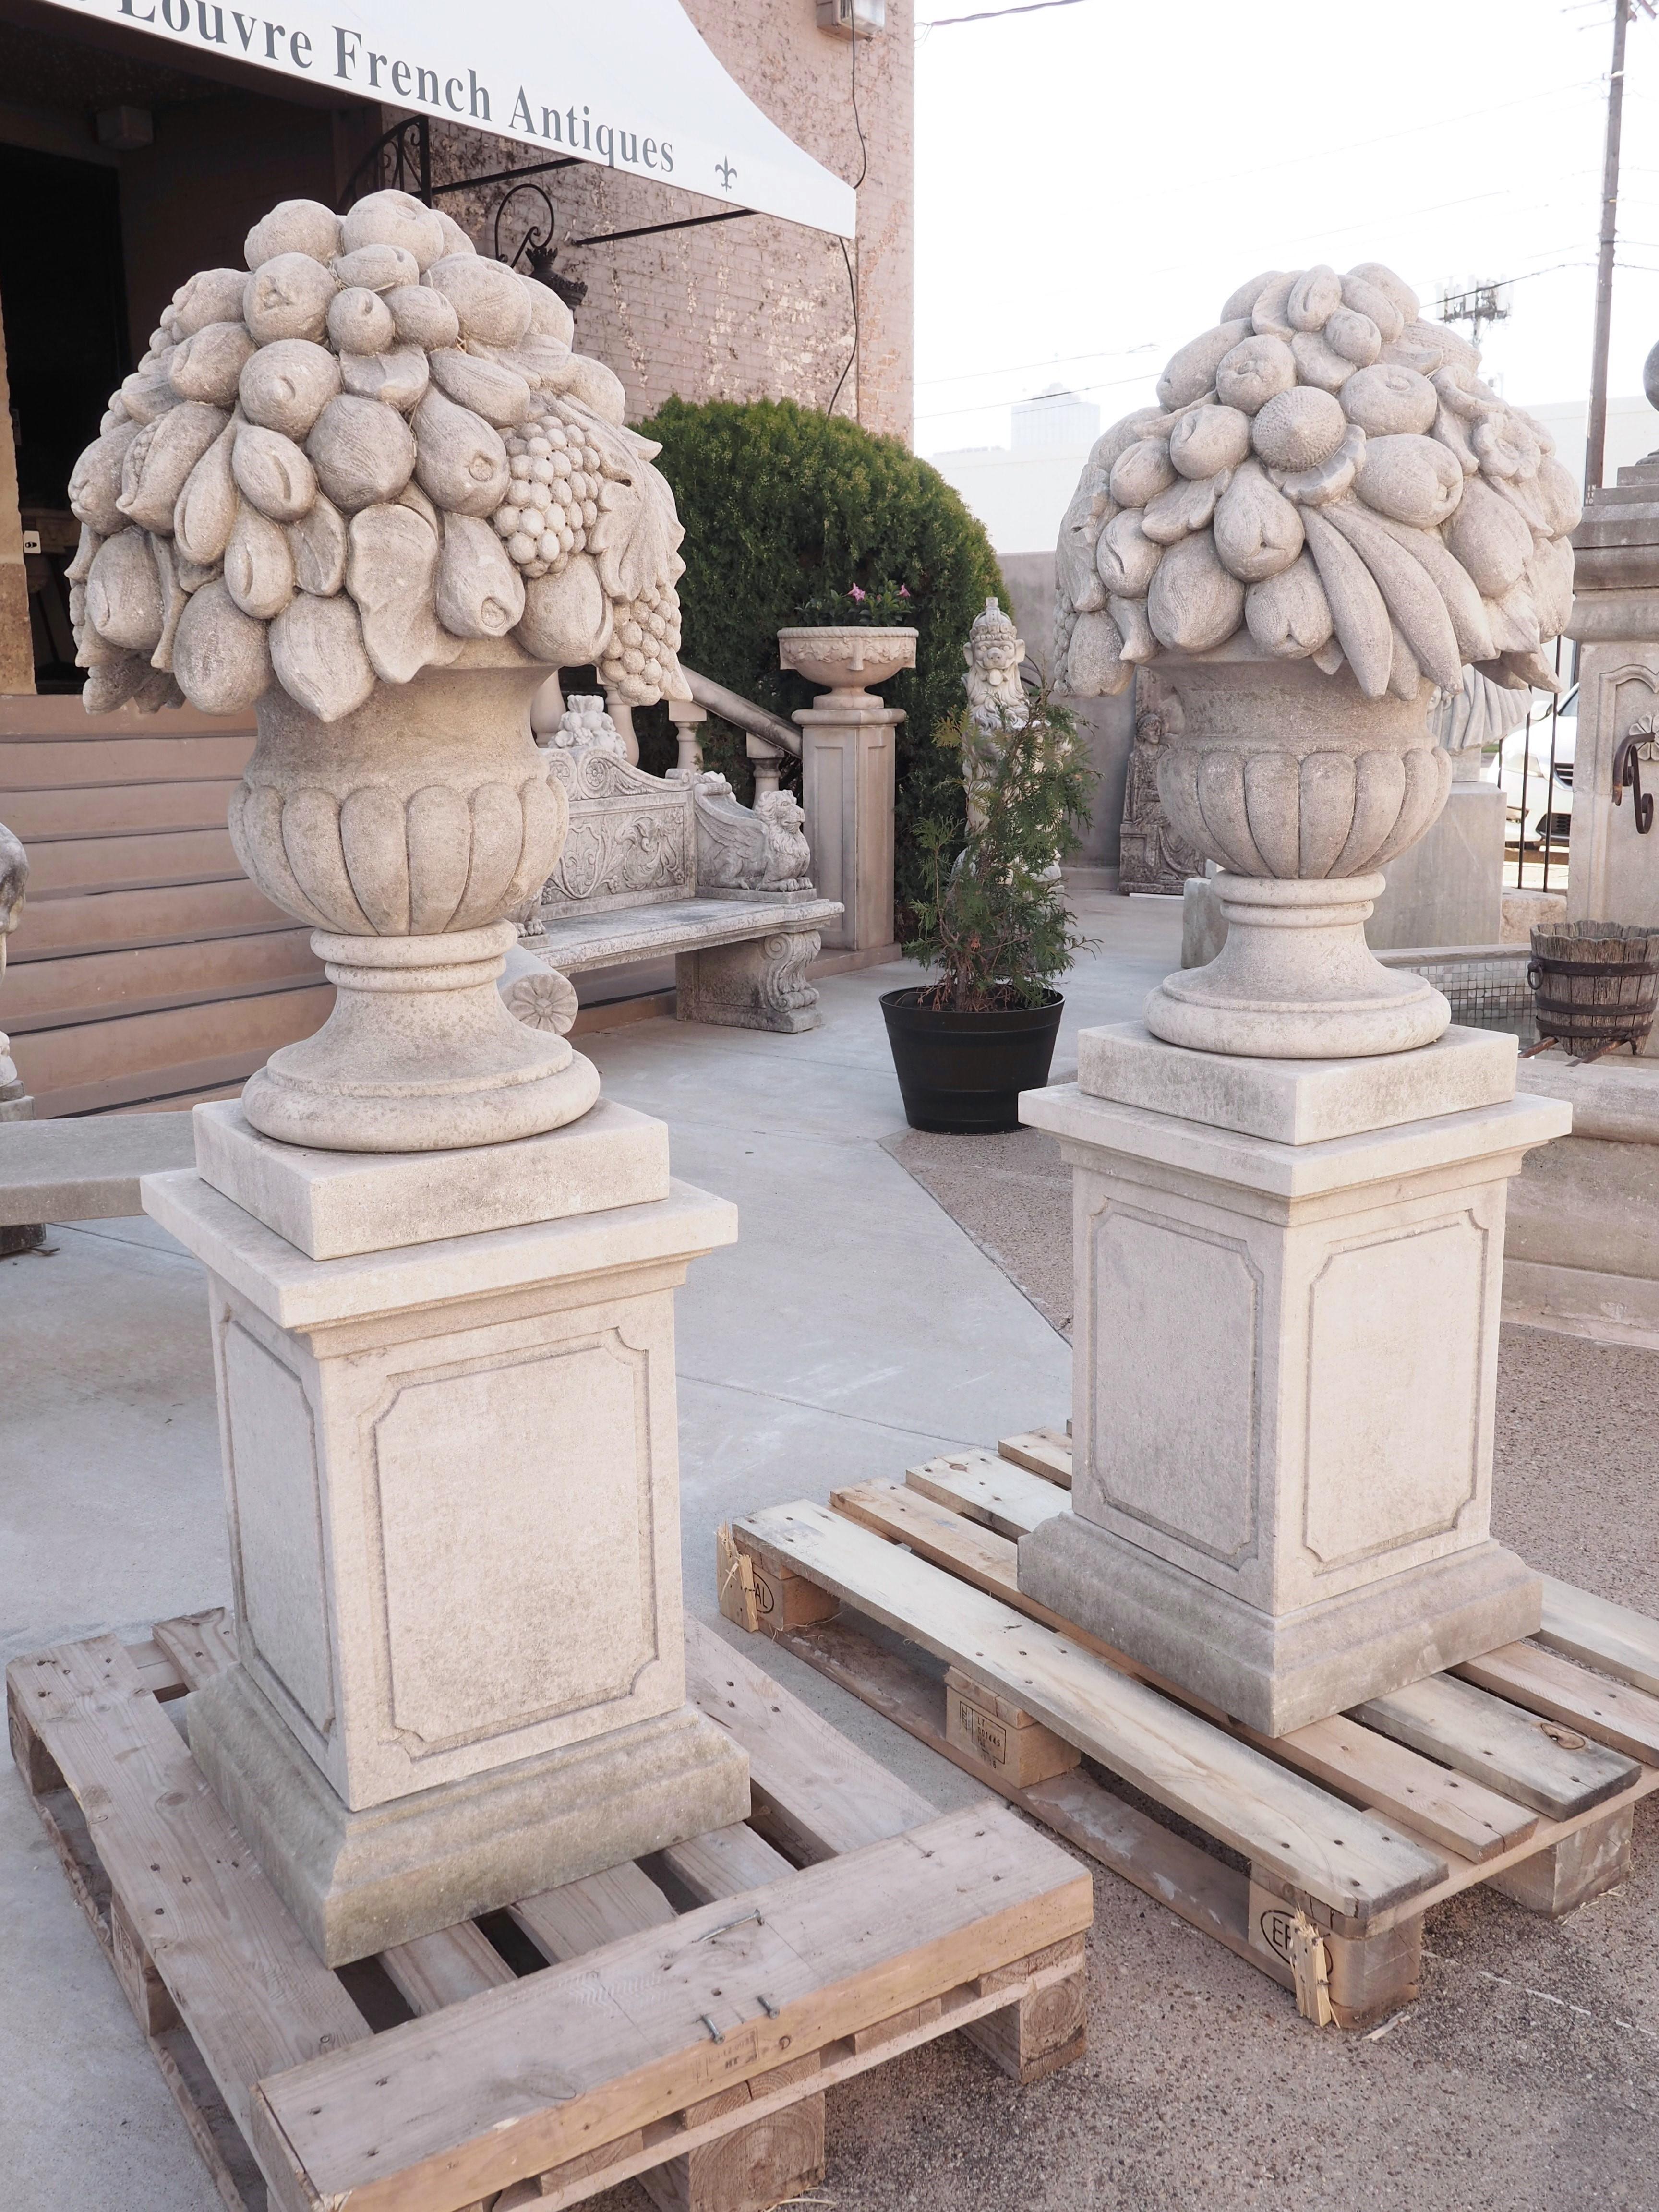 This impressive pair of fruit and floral bouquet urns on matching pedestals were hand-carved from Italian limestone. Both urns are overflowing with flowers, bananas, grapes, pomegranates, and more. The bulbous bodies of the campana shaped urns are